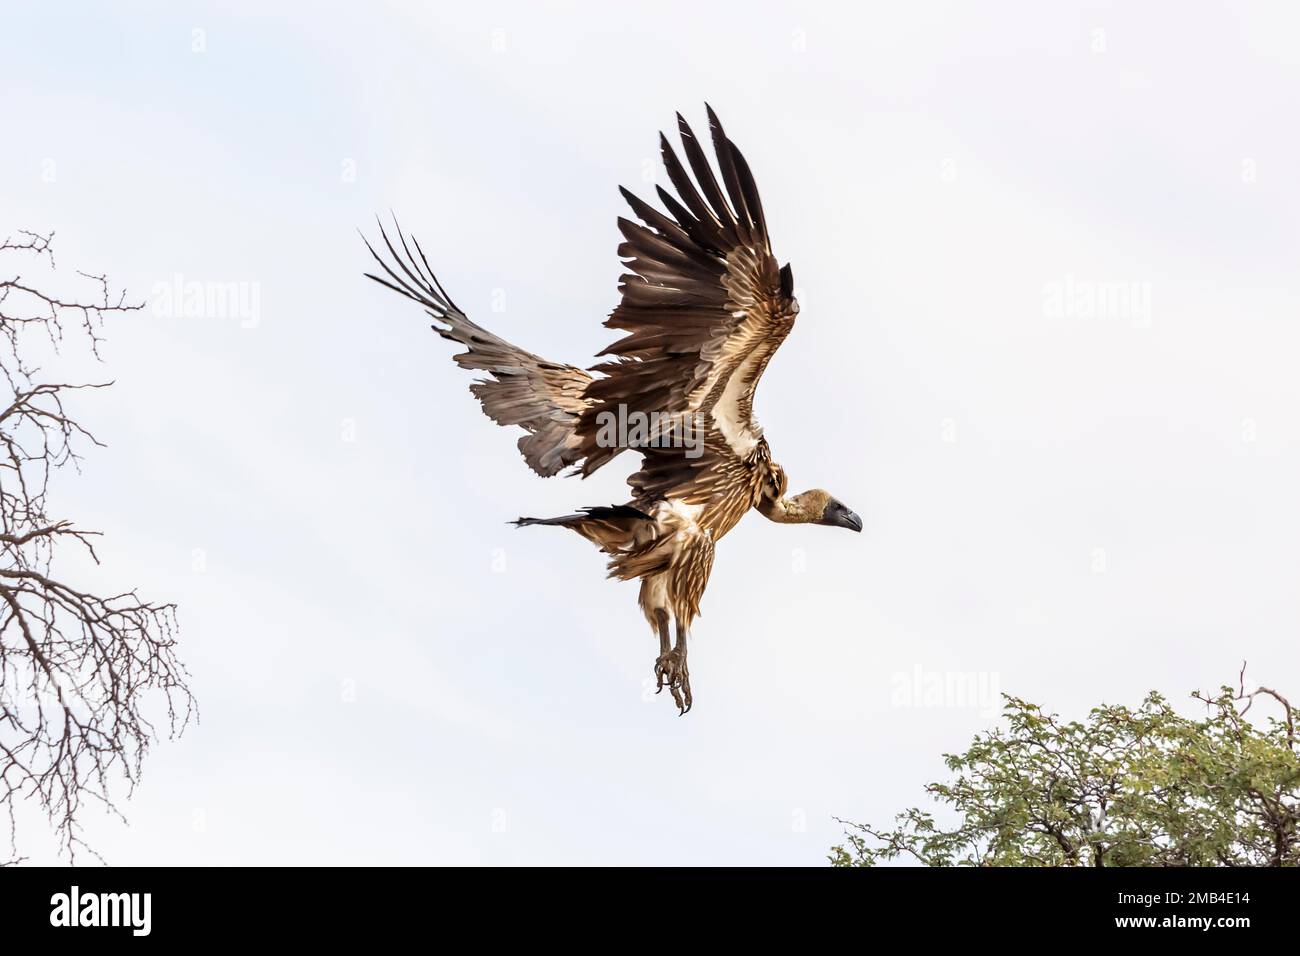 White backed Vulture flying isolated in white background in Kgalagadi transfrontier park, South Africa; Specie Gyps africanus family of Accipitridae Stock Photo